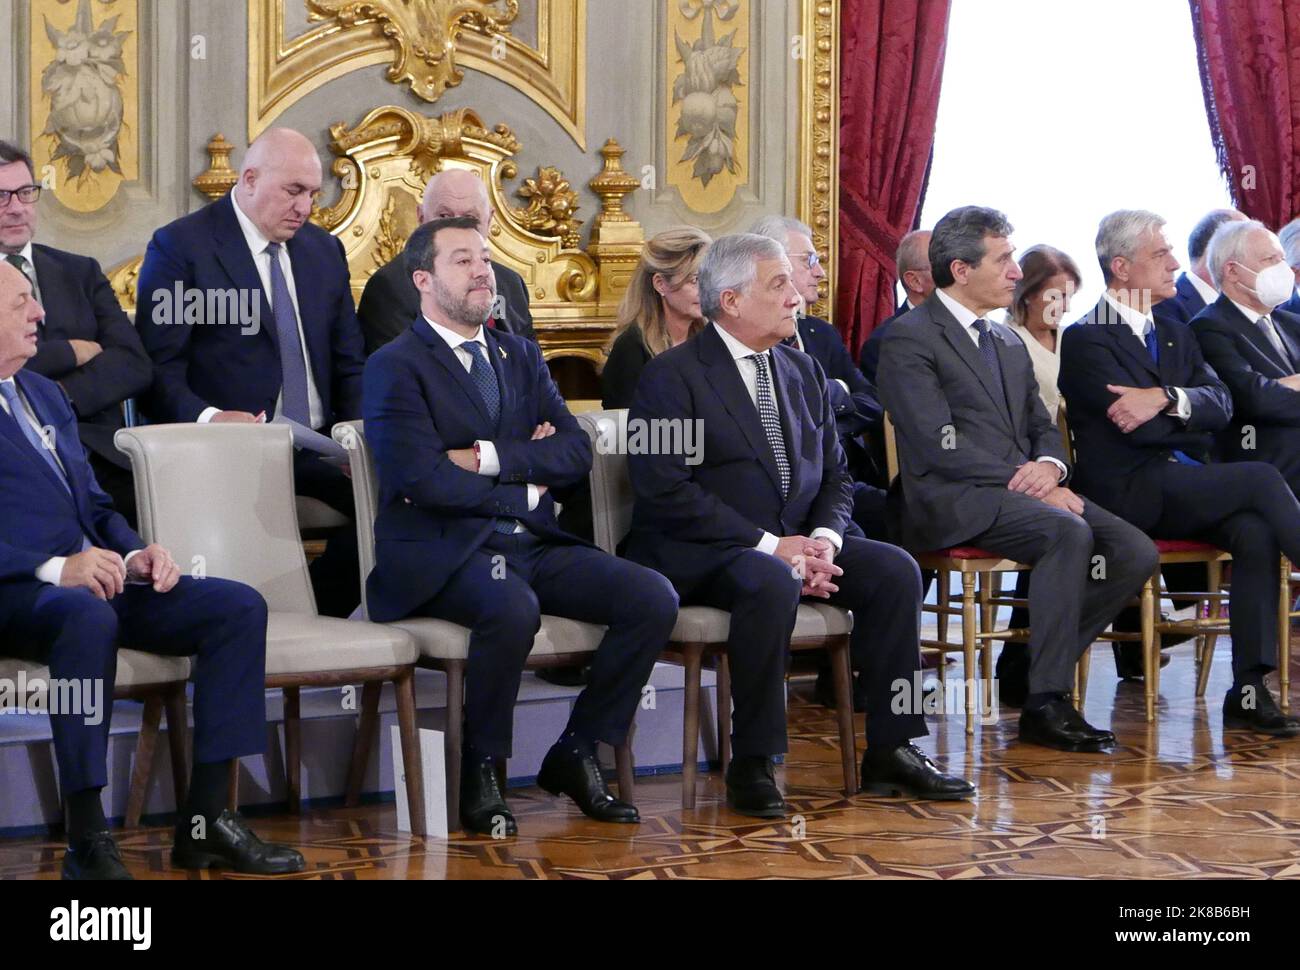 Rome, Italy. 22nd Oct, 2022. New Italian Ministers are going to swear the oath of Loyalty to the Italian Republic in Salone delle Feste at Palazzo del Quirinale, Rome, Italy, October 22 2022. In the middle of the first row, the two Deputy Prime Ministers Matteo Salvini and Antonio Tajani. (Photo by Elisa Gestri/SIPA USA) Credit: Sipa USA/Alamy Live News Stock Photo